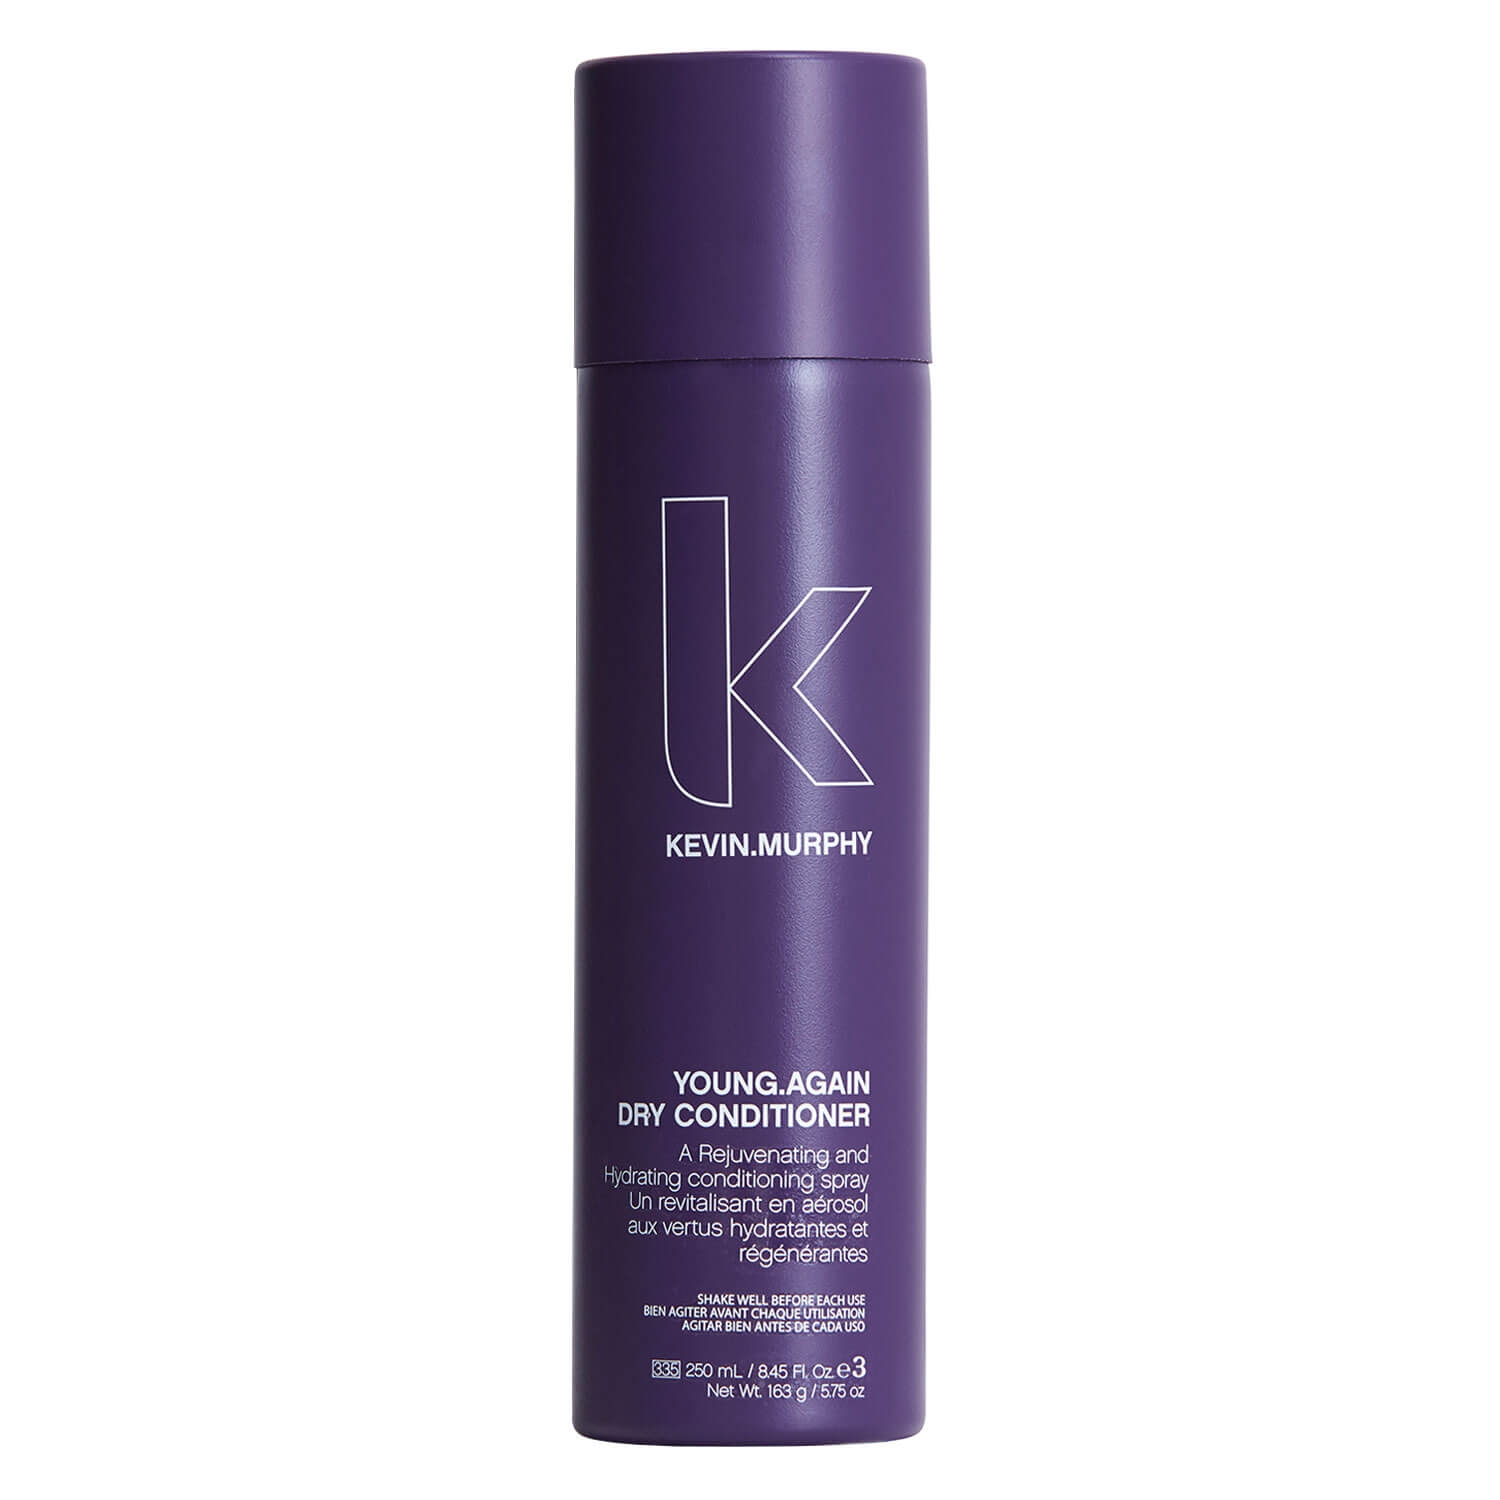 Product image from Young.Again - Dry Conditioner